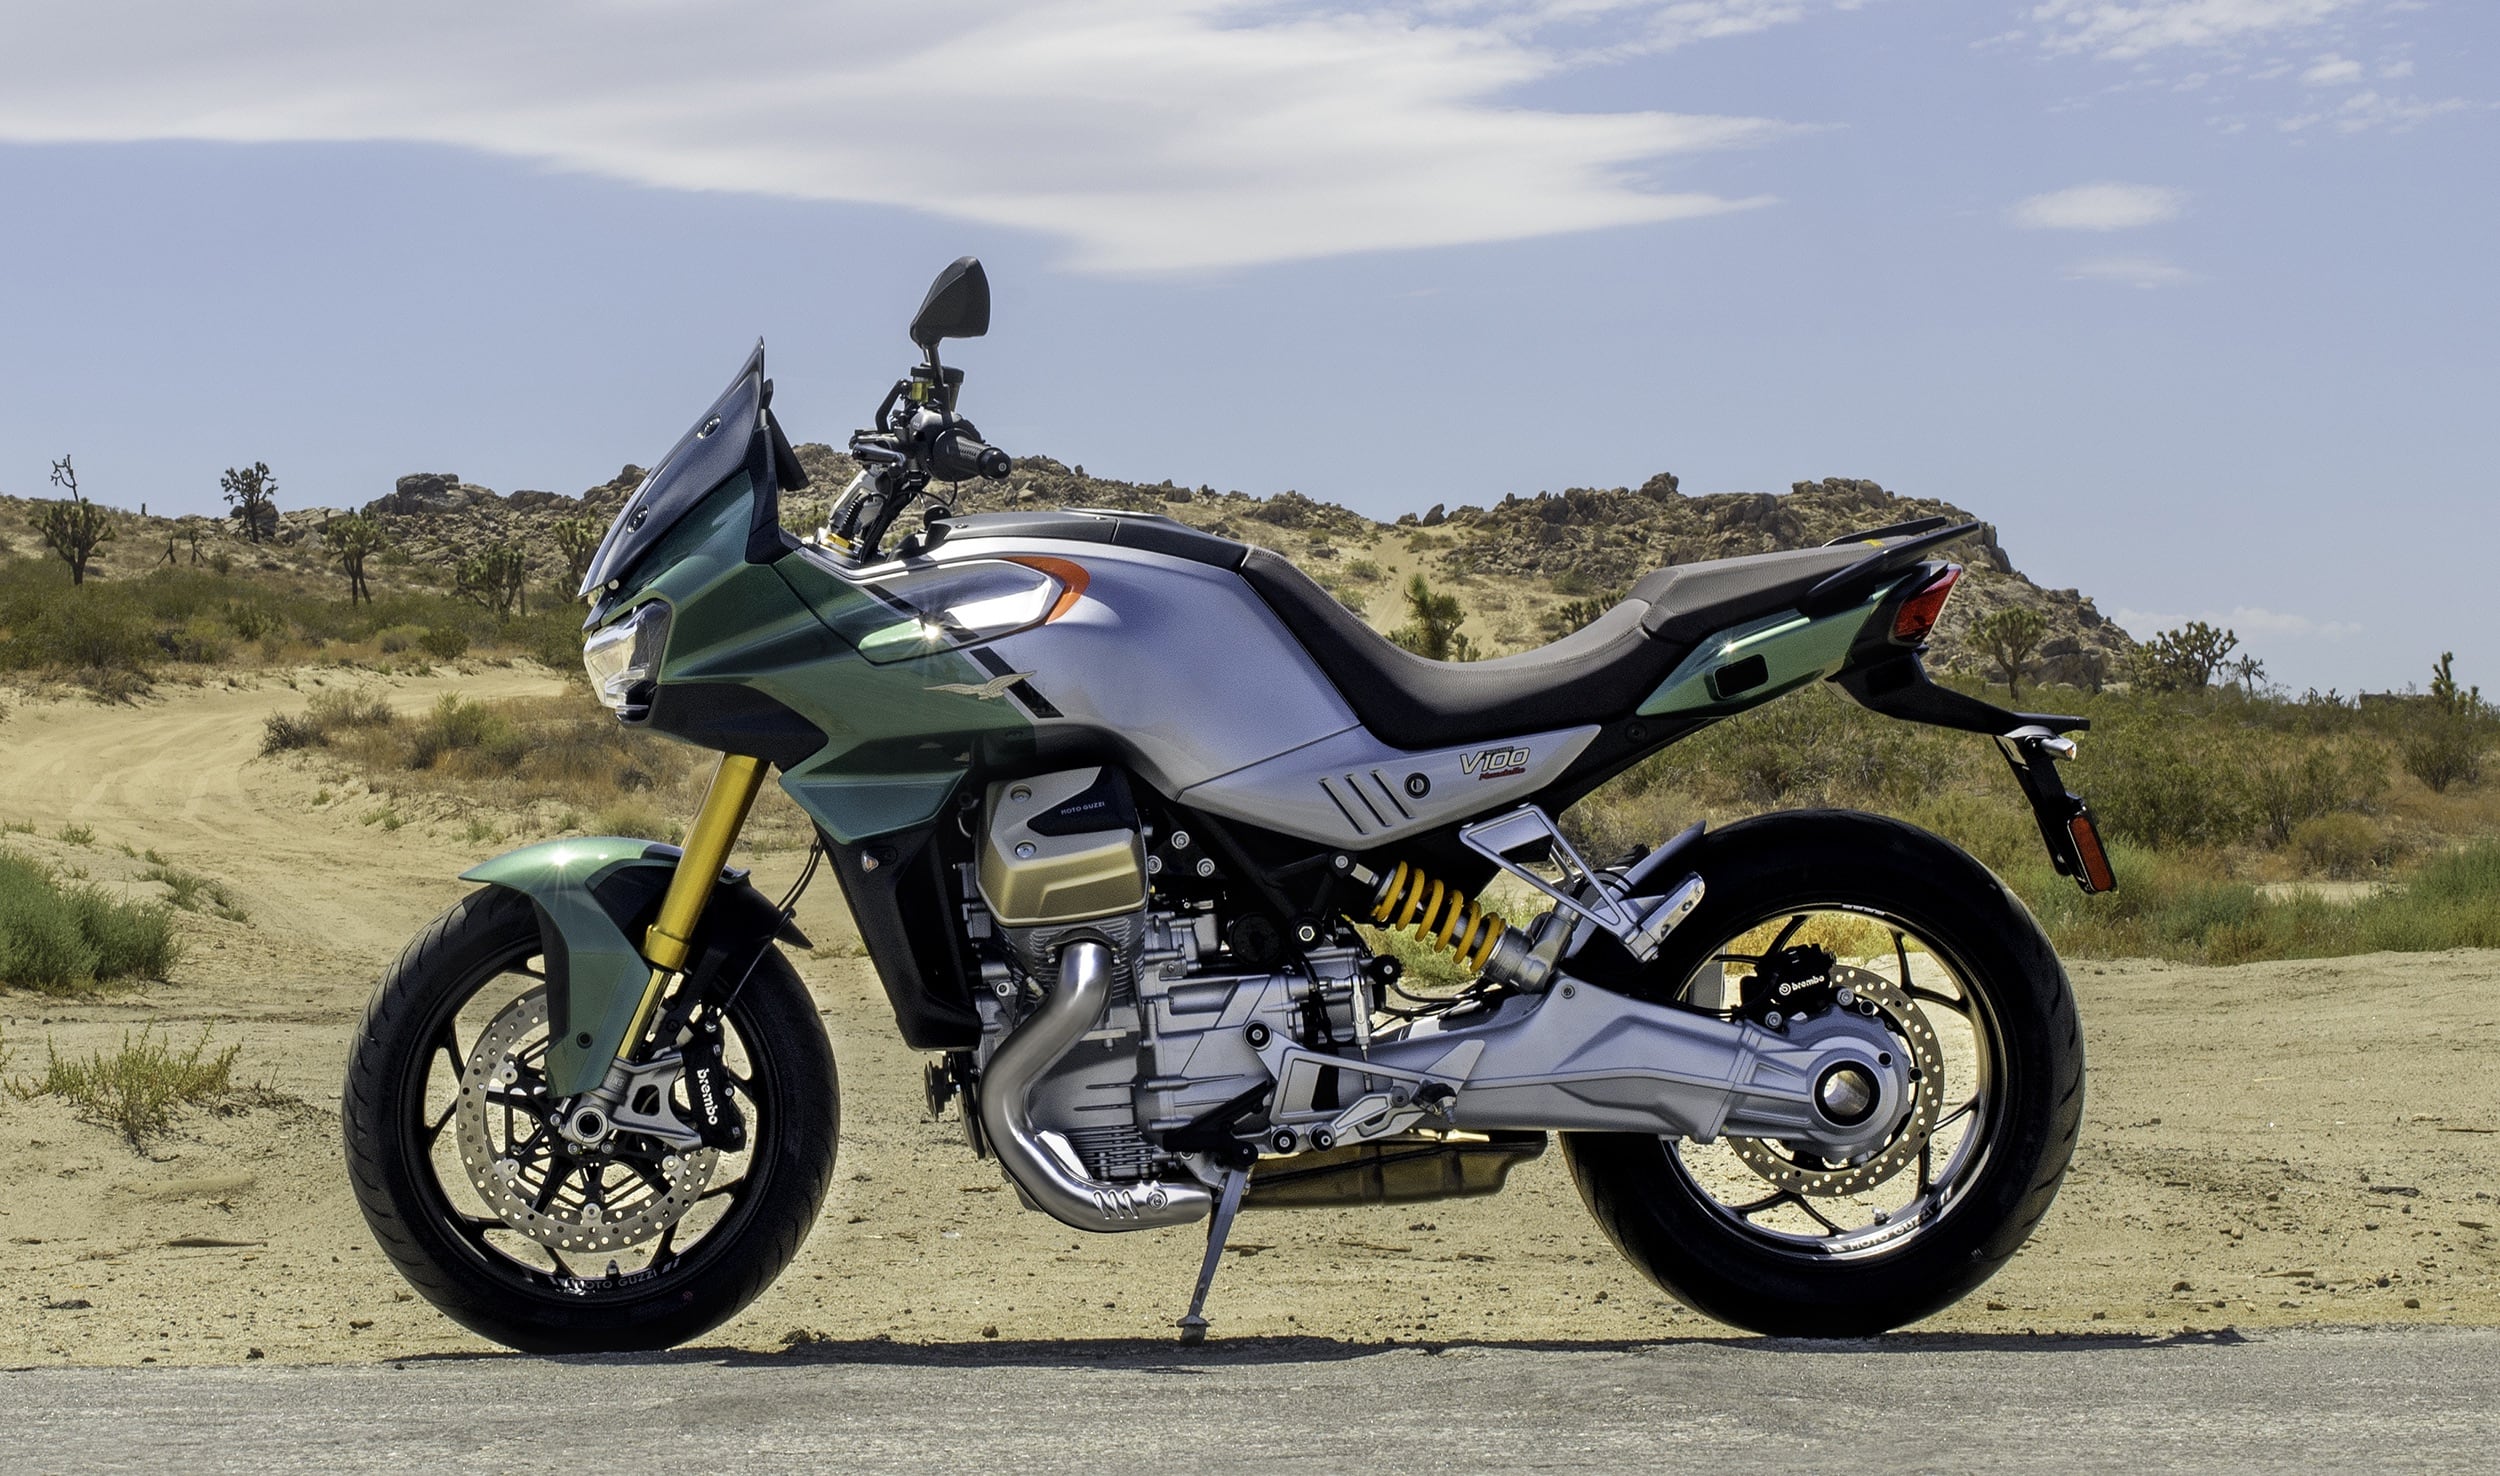 Moto Guzzi's V100 Mandello Is First Production Bike with Active